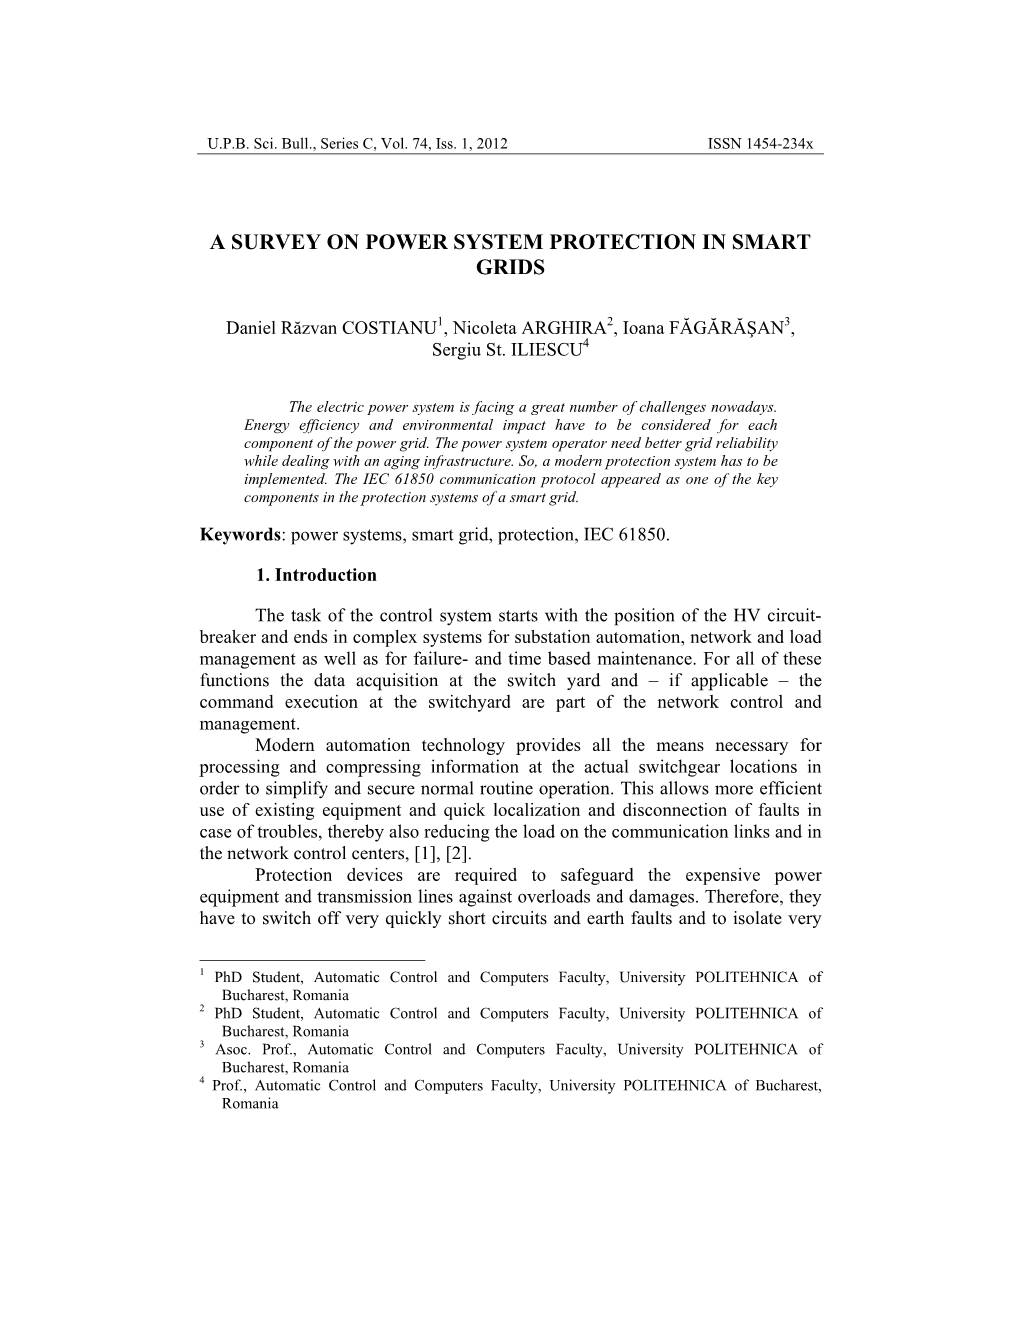 A Survey on Power System Protection in Smart Grids